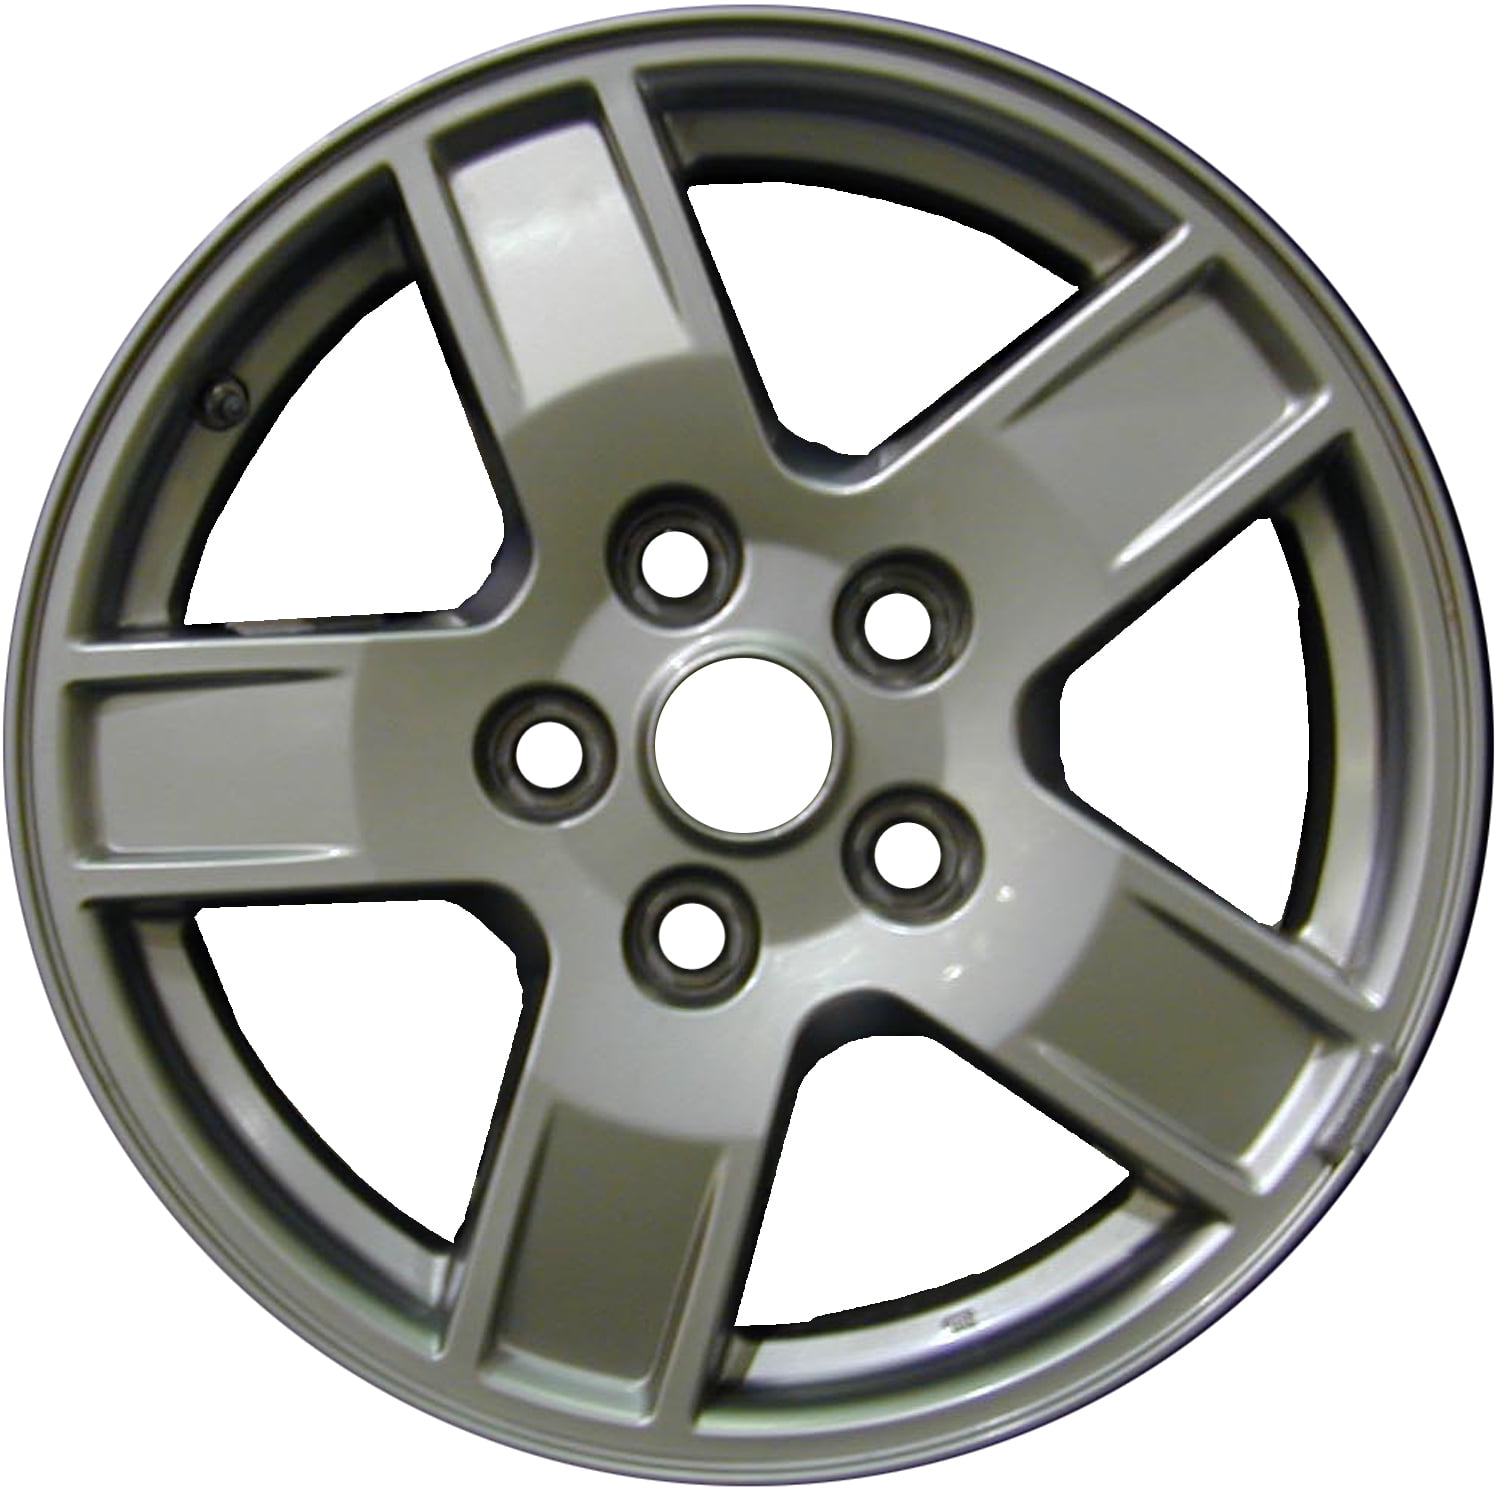 New 17" x 7.5" Replacement Wheel Rim for 2008 2009 2010 Jeep Grand Cherokee